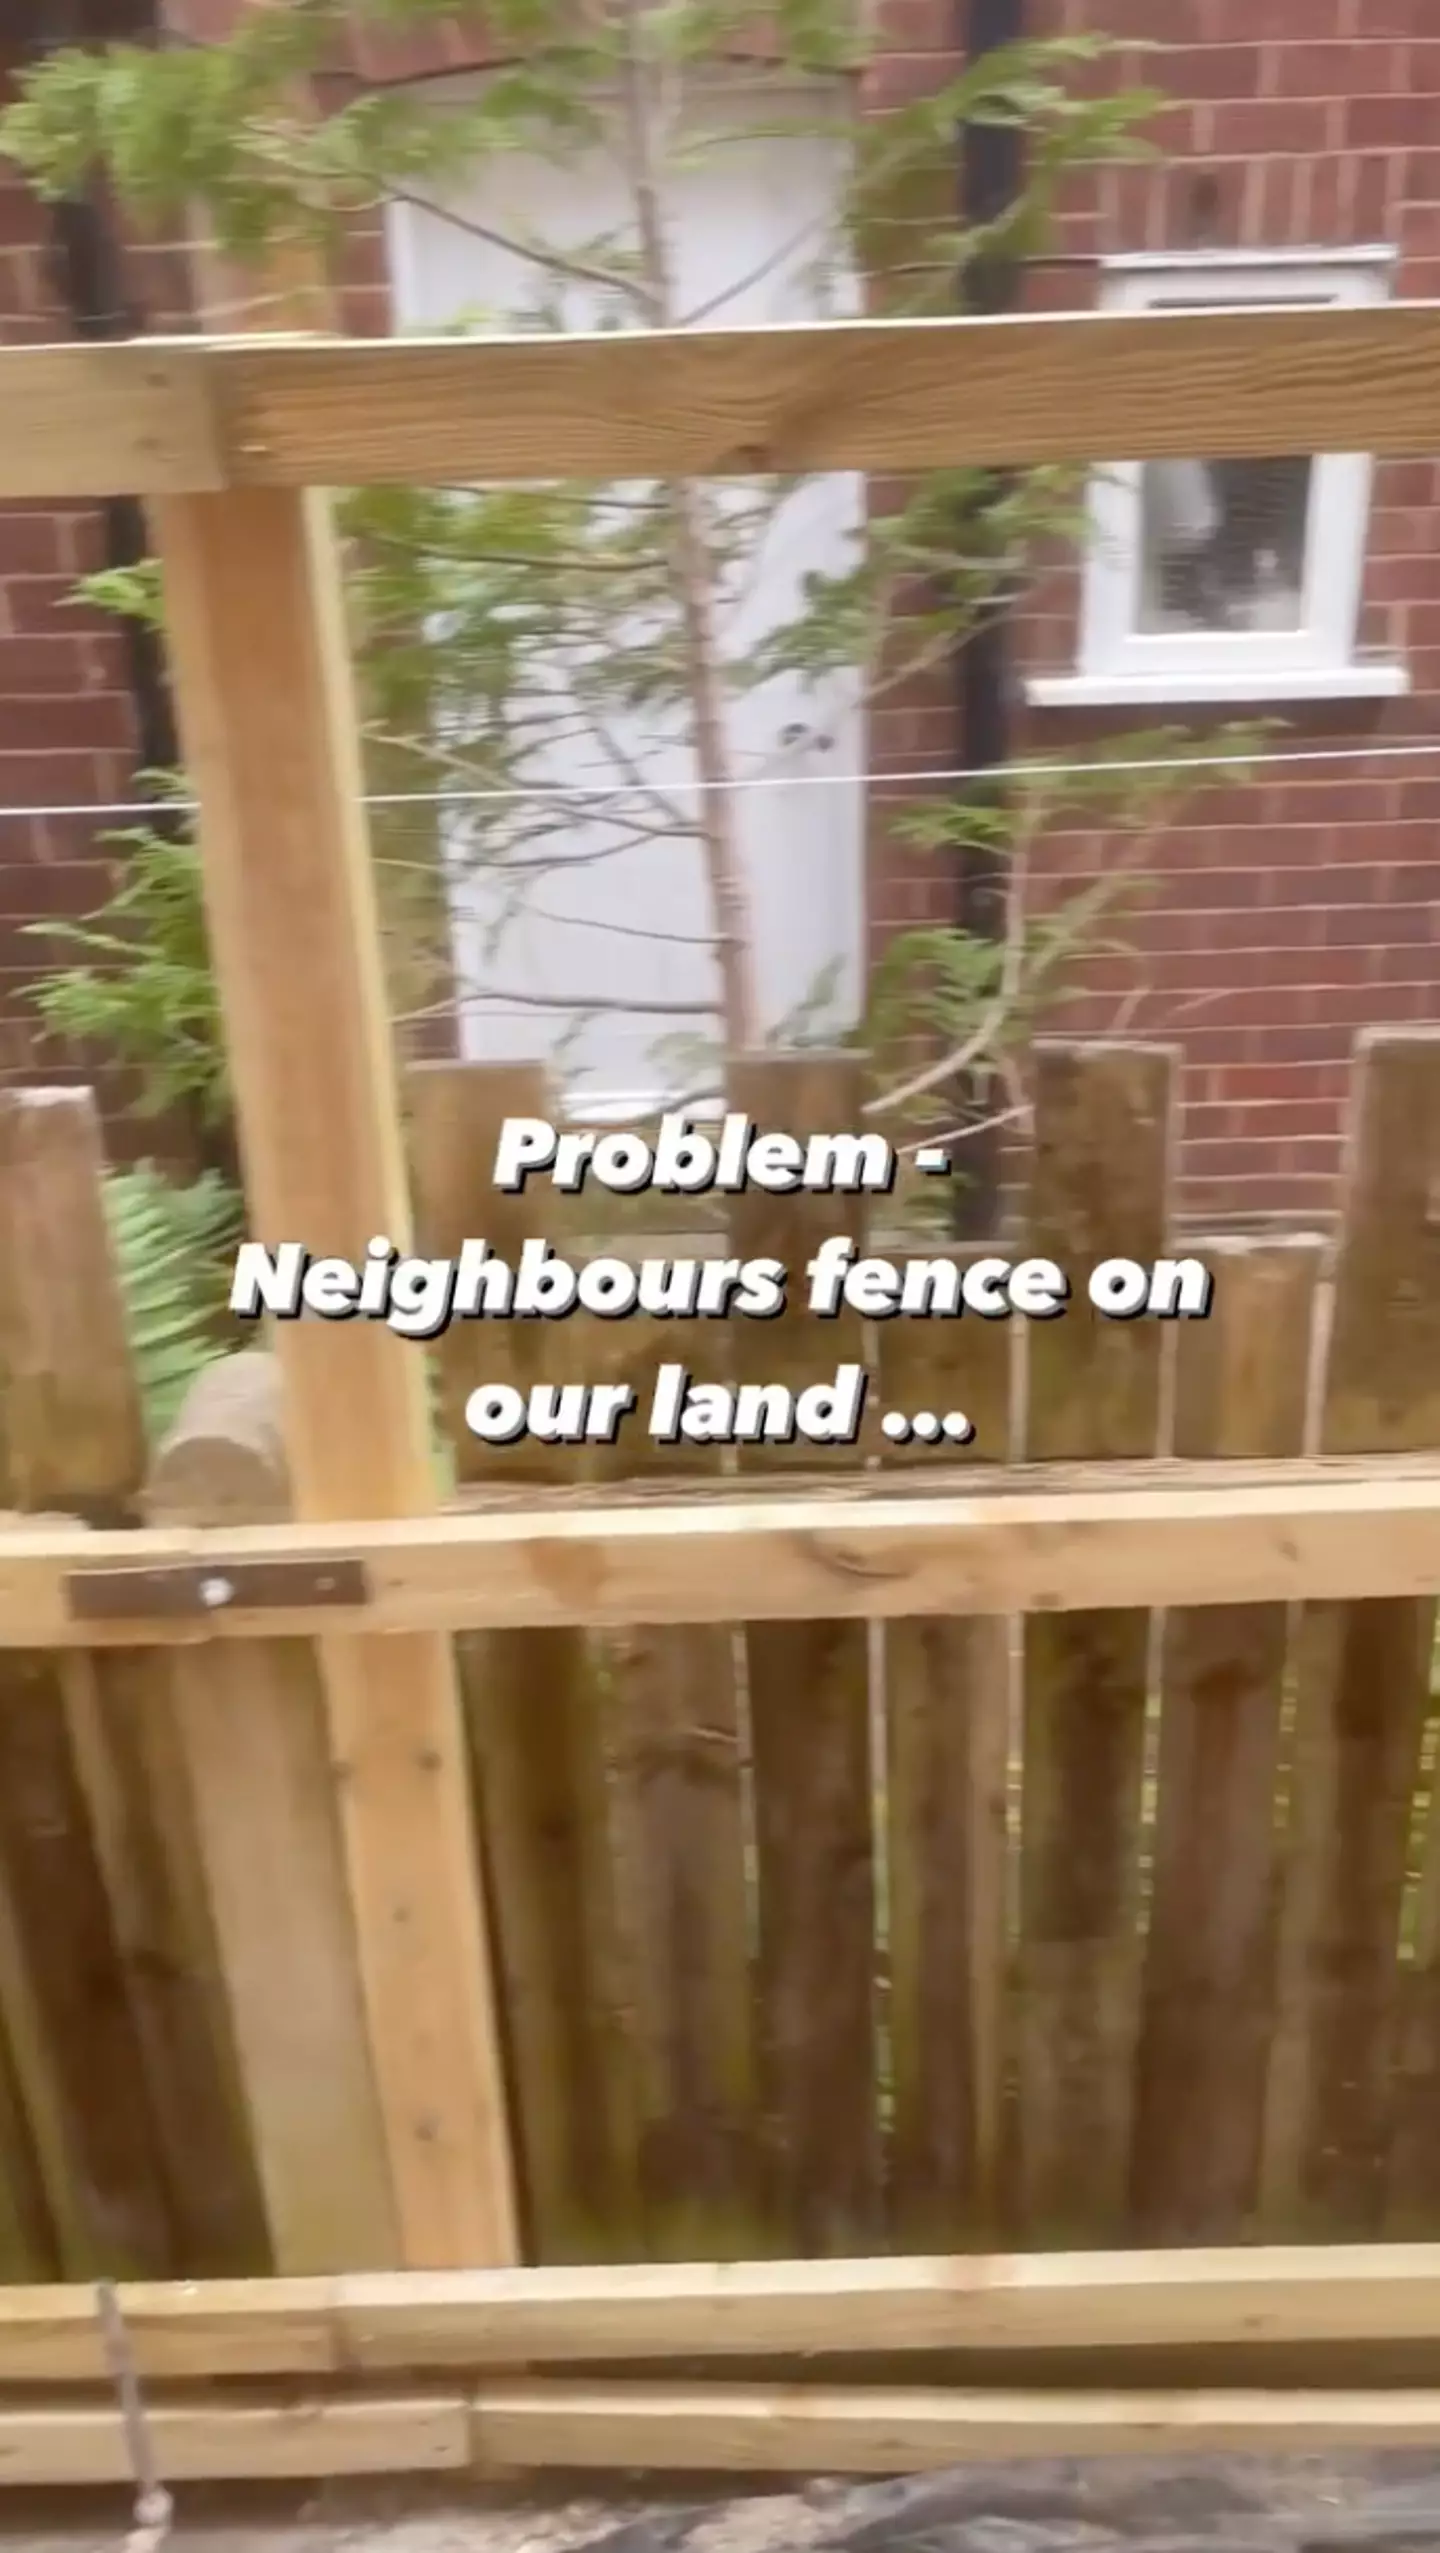 They said the fence was built on their land.